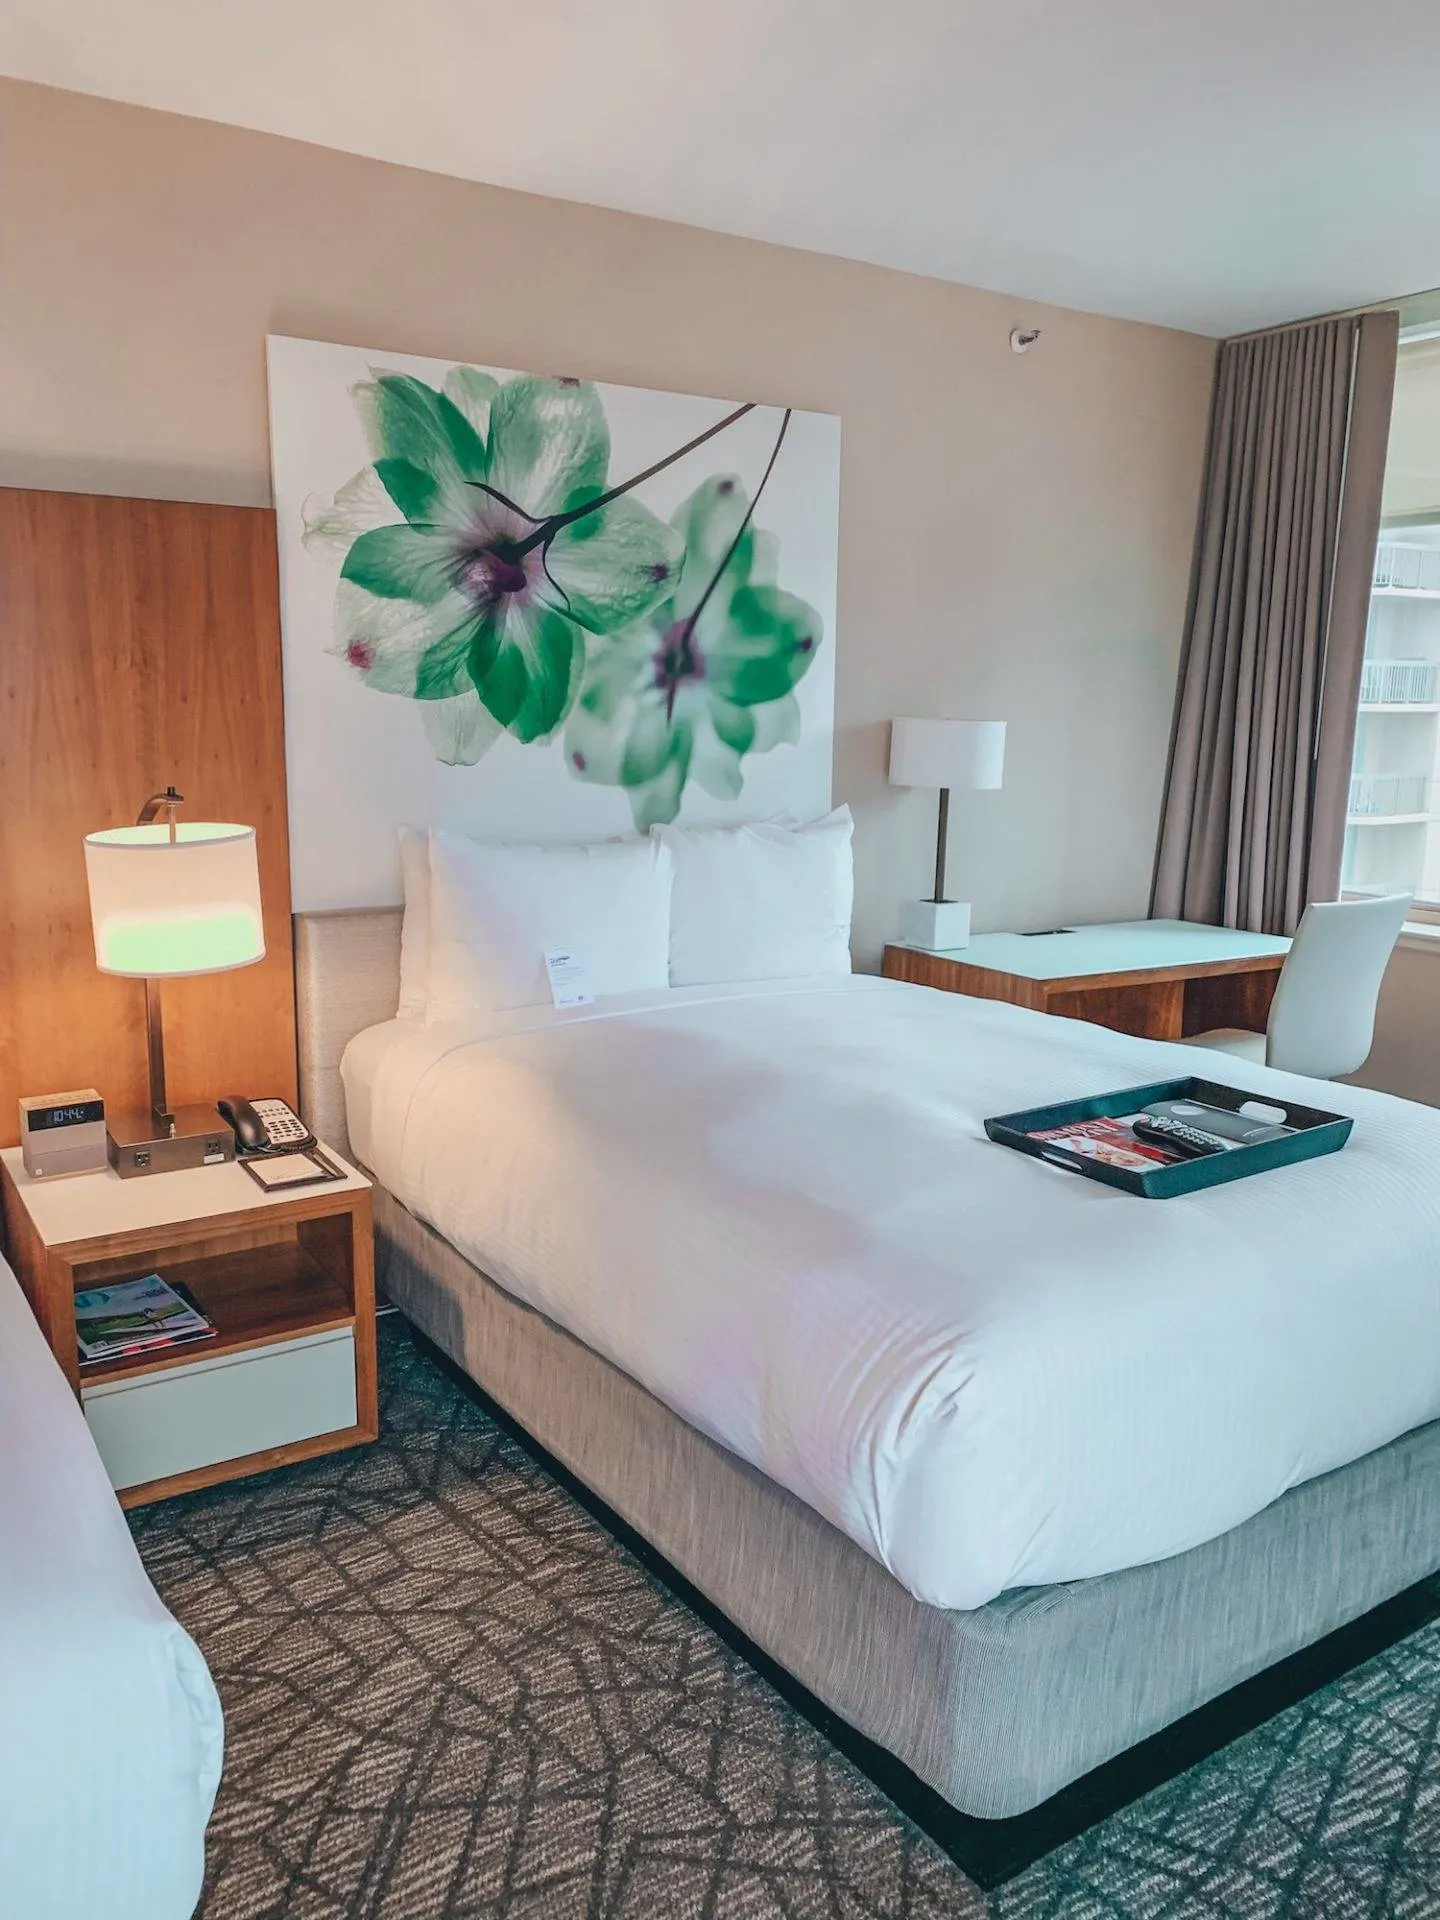 Where to stay in Chicago: The Fairmont Chicago Millenium Park. There are so many reasons why we loved staying with the Fairmont when we visited Chicago. Click the post to read my full review! Pictured here: The incredibly spacious and modern rooms